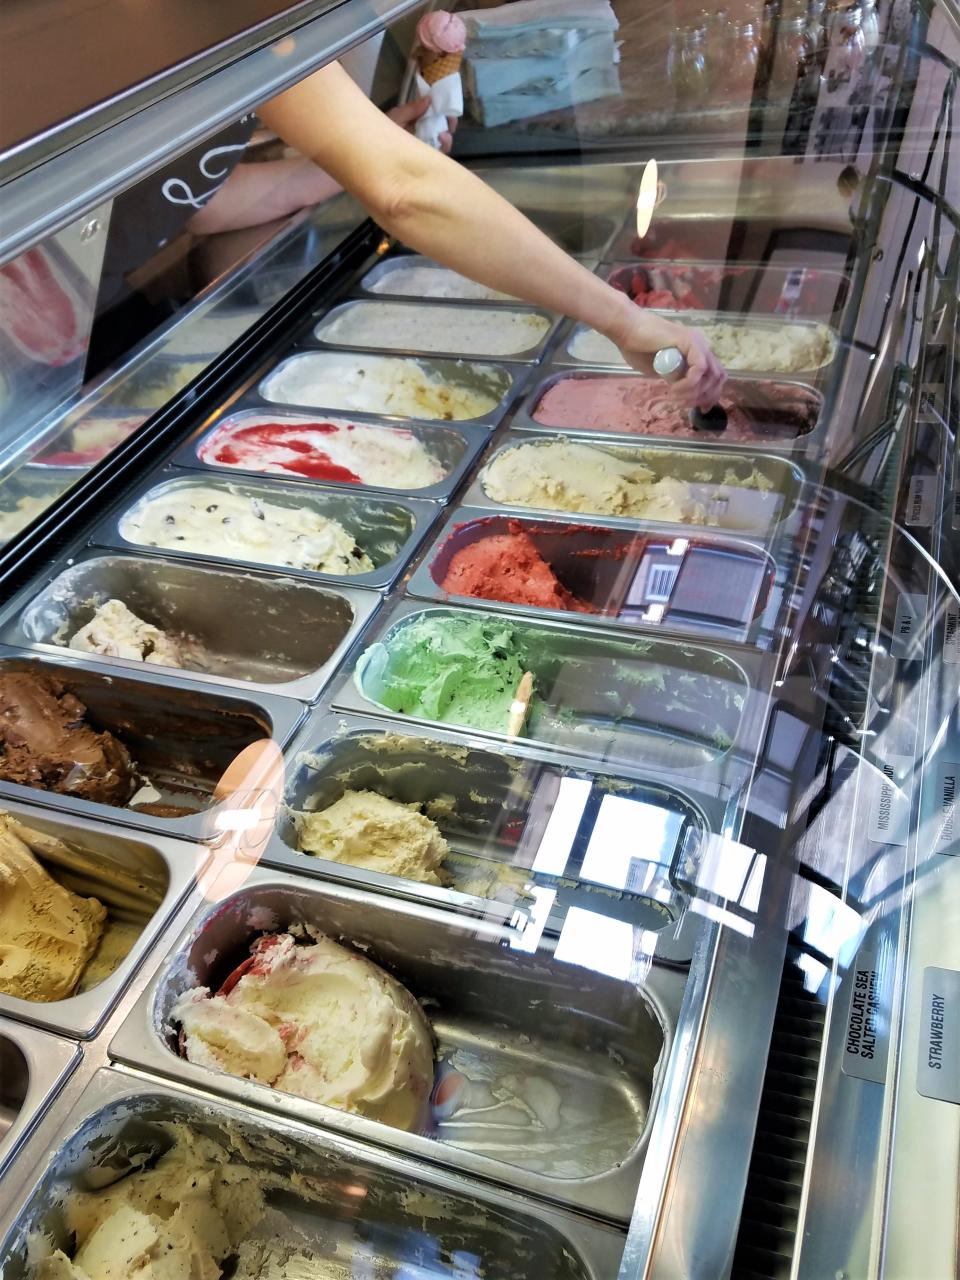 Bliss Artisan Ice Cream, which began in New Harmony, moved to Mount Vernon, and is now located in Tell City, is known for over 50 flavors of hand-made ice cream. A dozen at a time will now be available at Dontae's Highland Pizza Parlor.